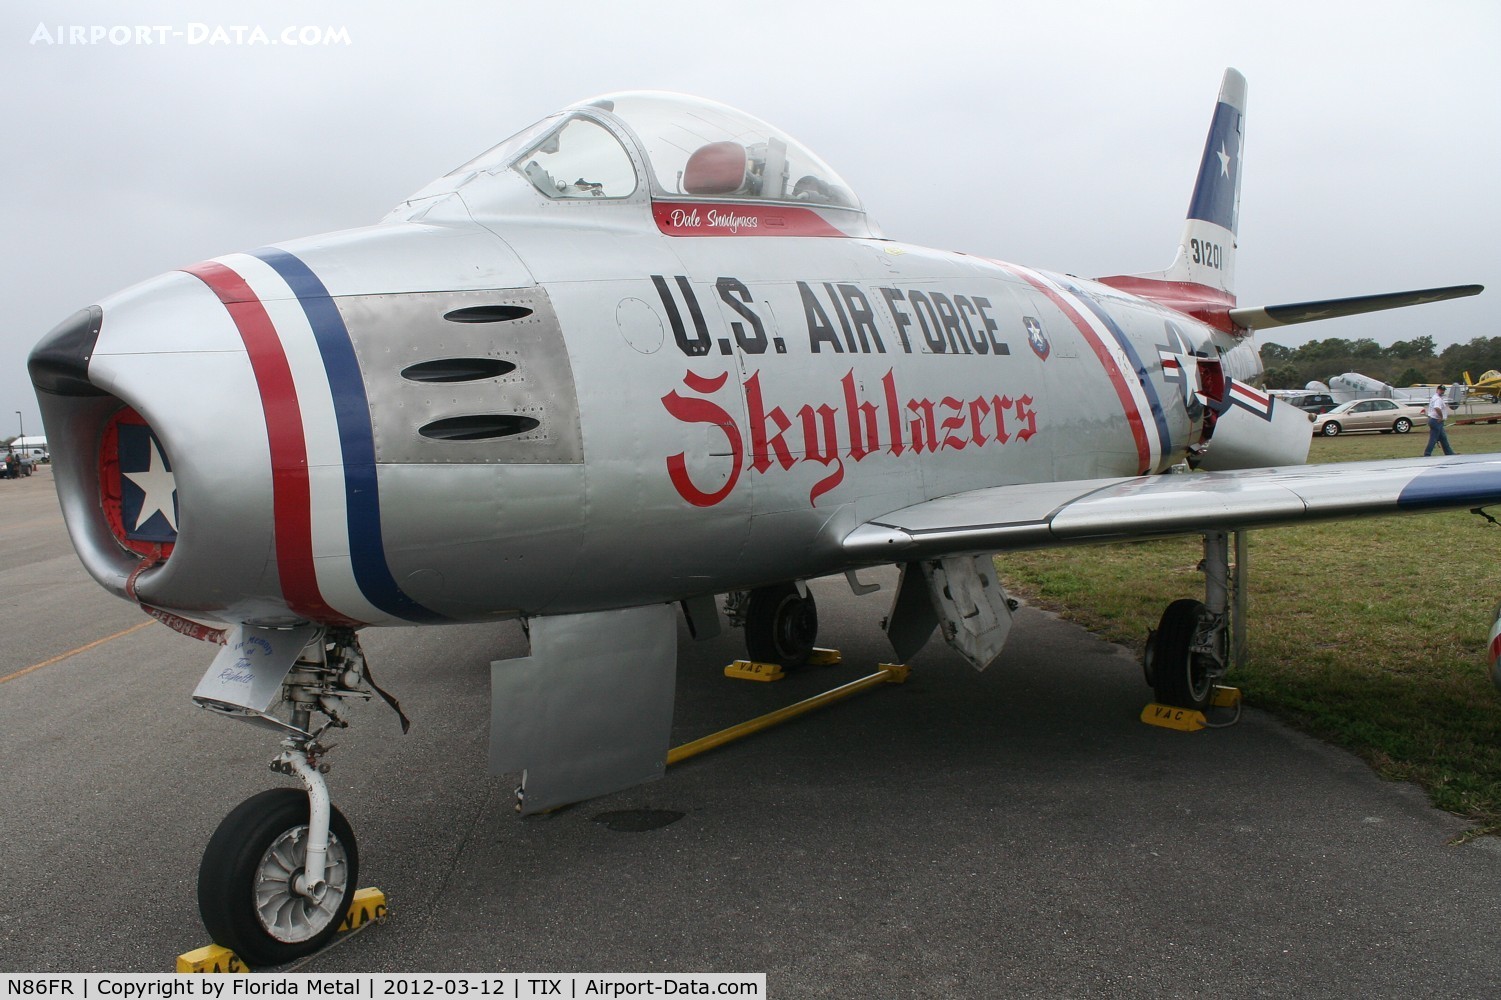 N86FR, 1952 North American F-86F Sabre C/N 191-655, F-86F hasn't flown the last couple of years at this show